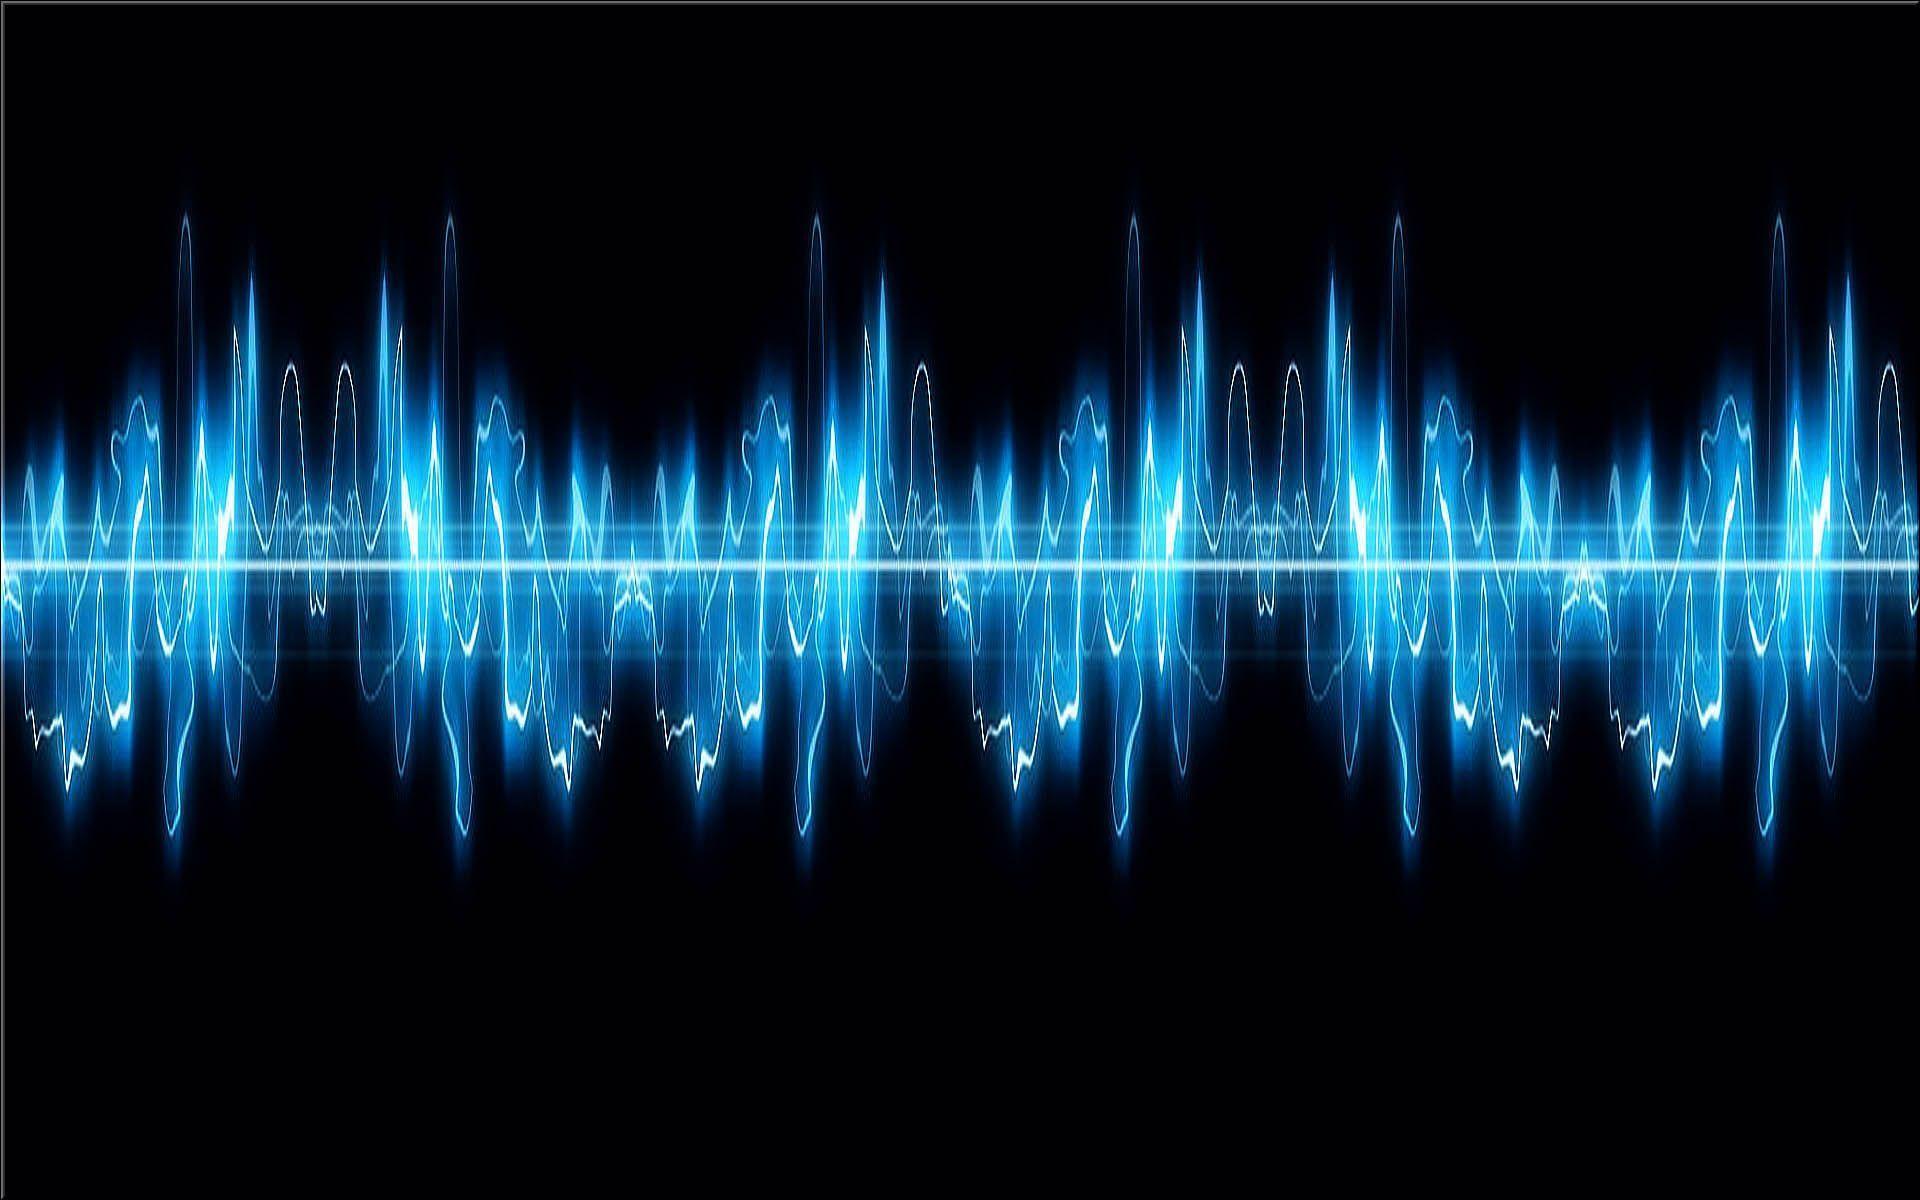 Wallpaper For > Moving Sound Waves Wallpaper. Music Waves & more